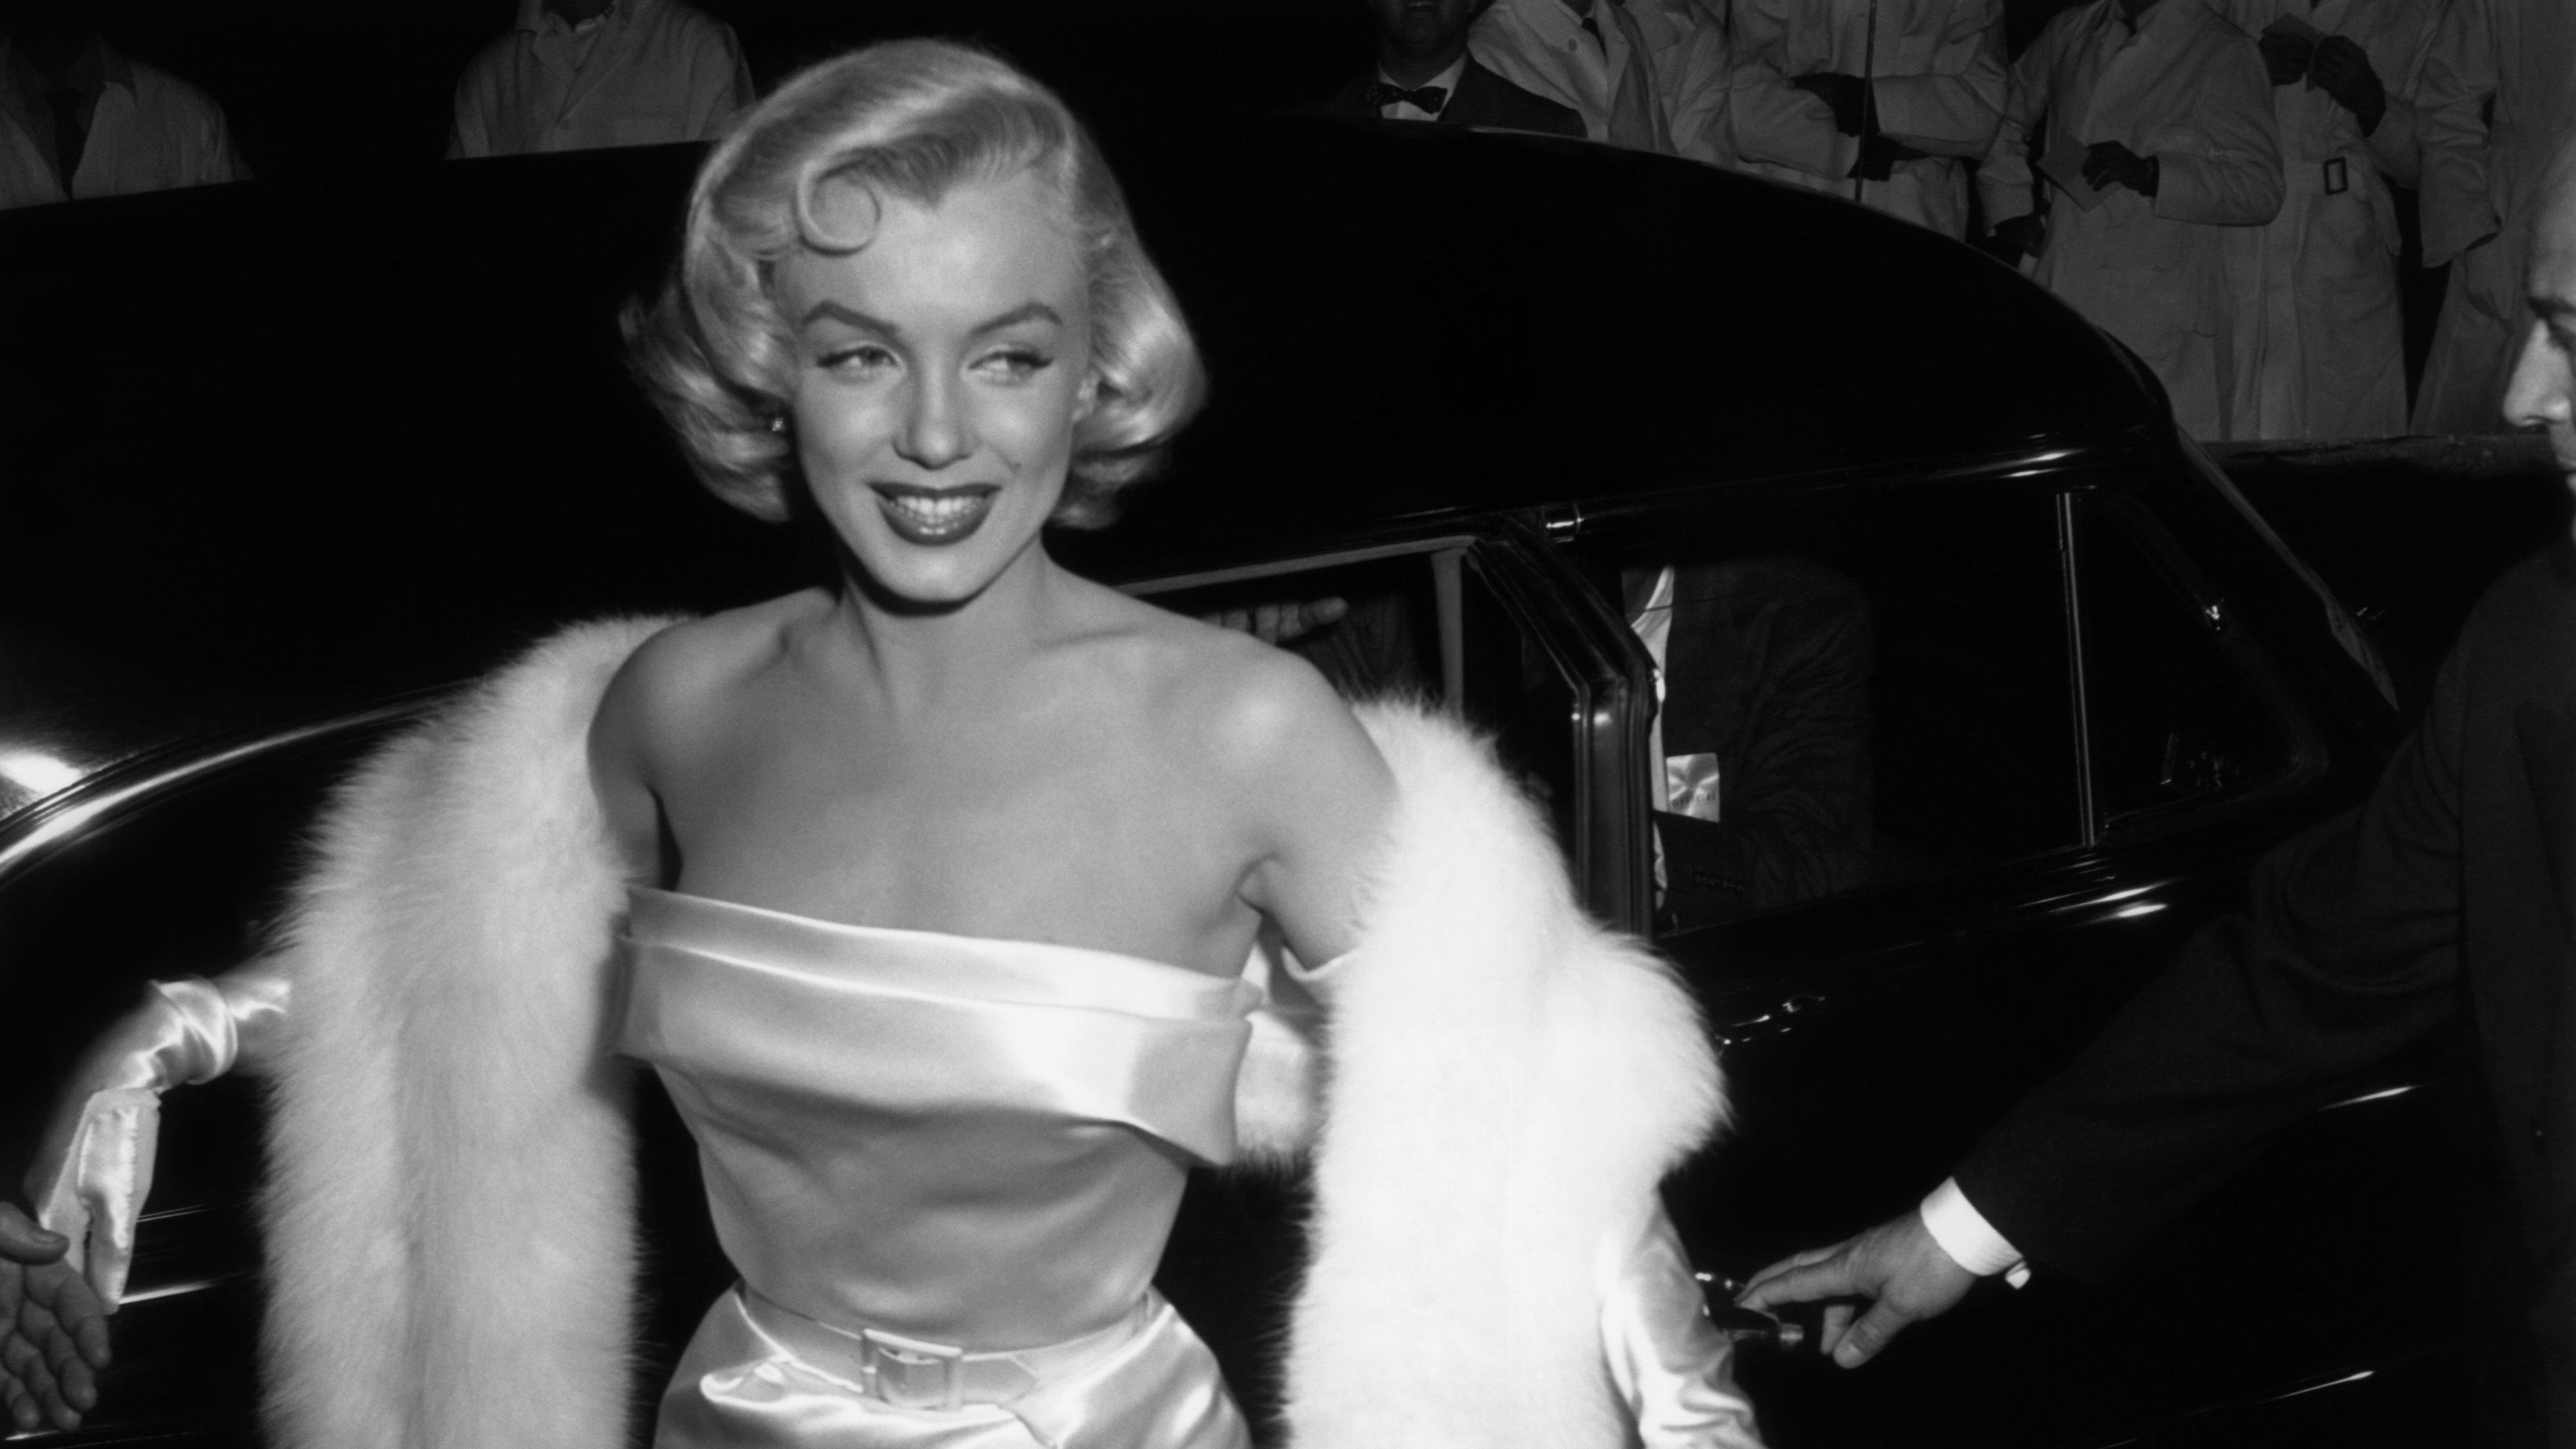 Blonde': What's fact, what's fiction in Marilyn Monroe Netflix movie